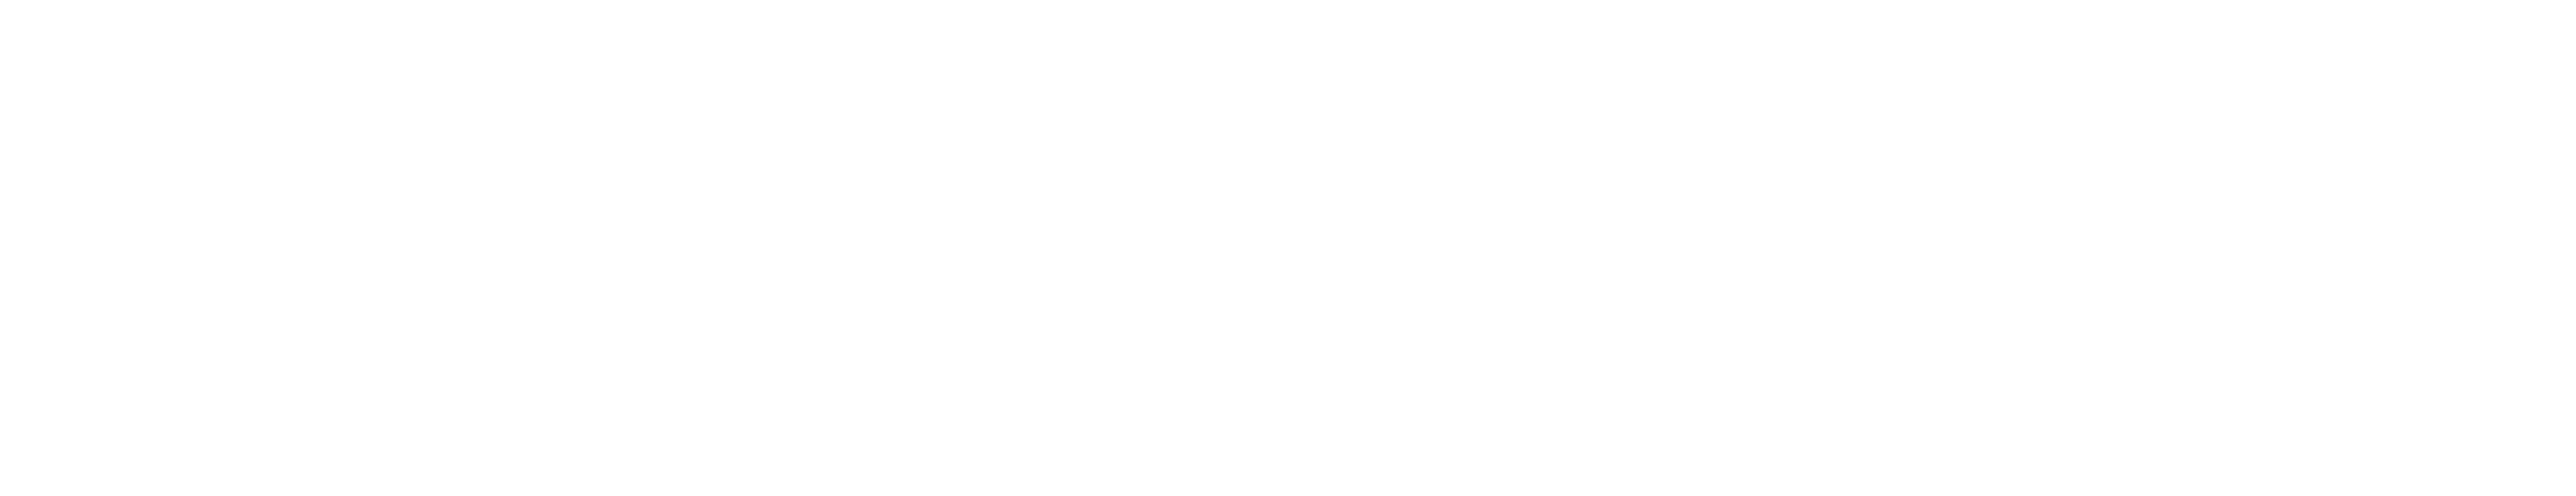 Beautiful Motion Pictures - MAKEit MADEit Conference